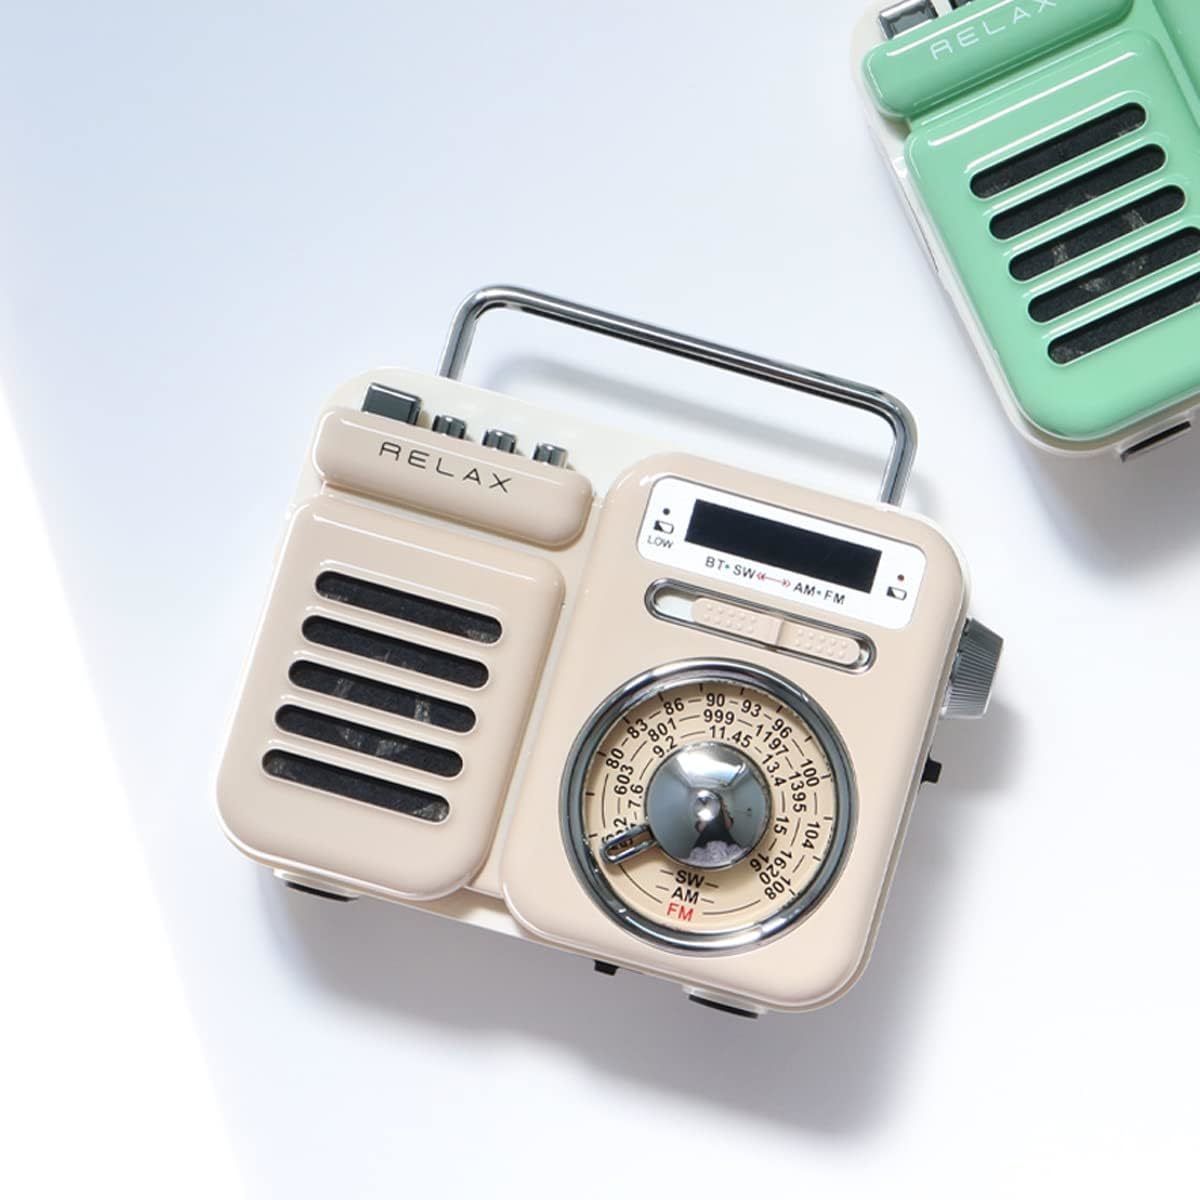  multifunction . portable radio mobile radio RELAX disaster prevention car middle speaker FM AM SW Bluetooth LED light small size retro wonderful present . you .